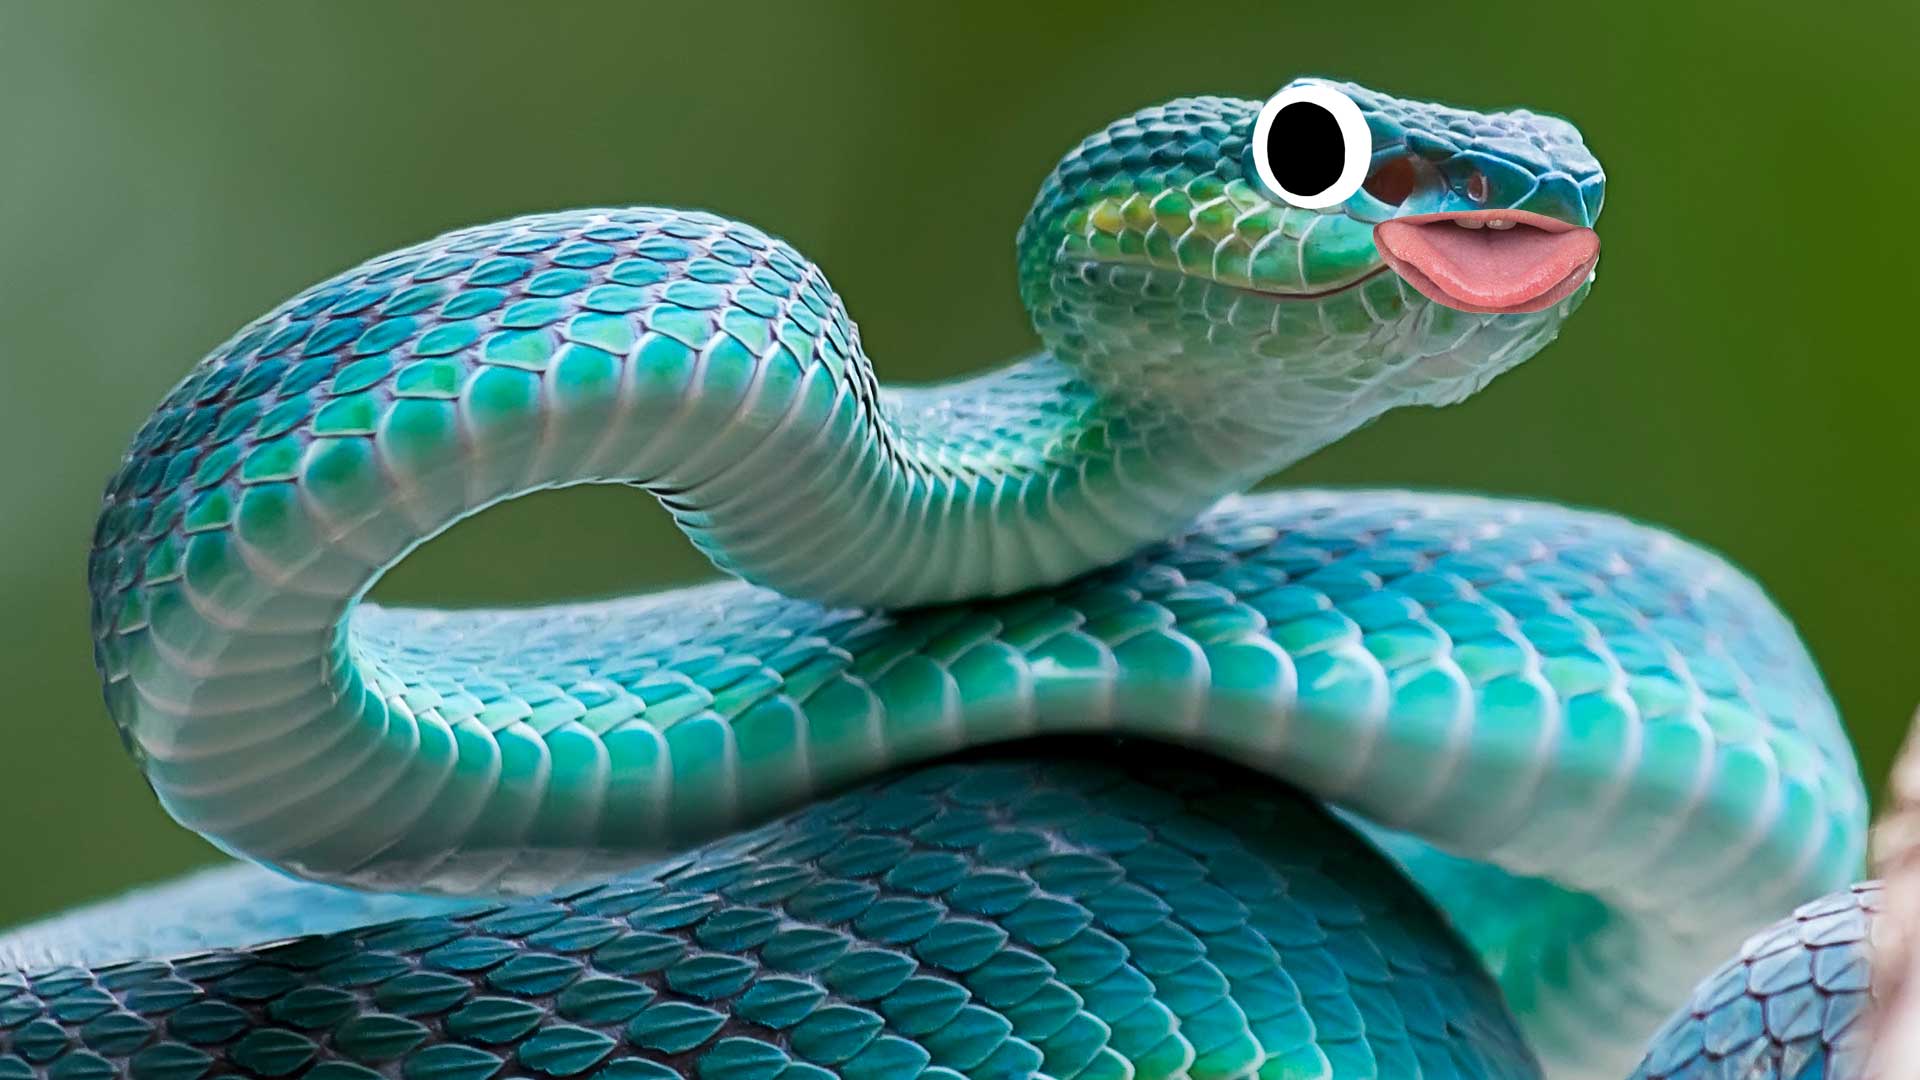 A coiled snake